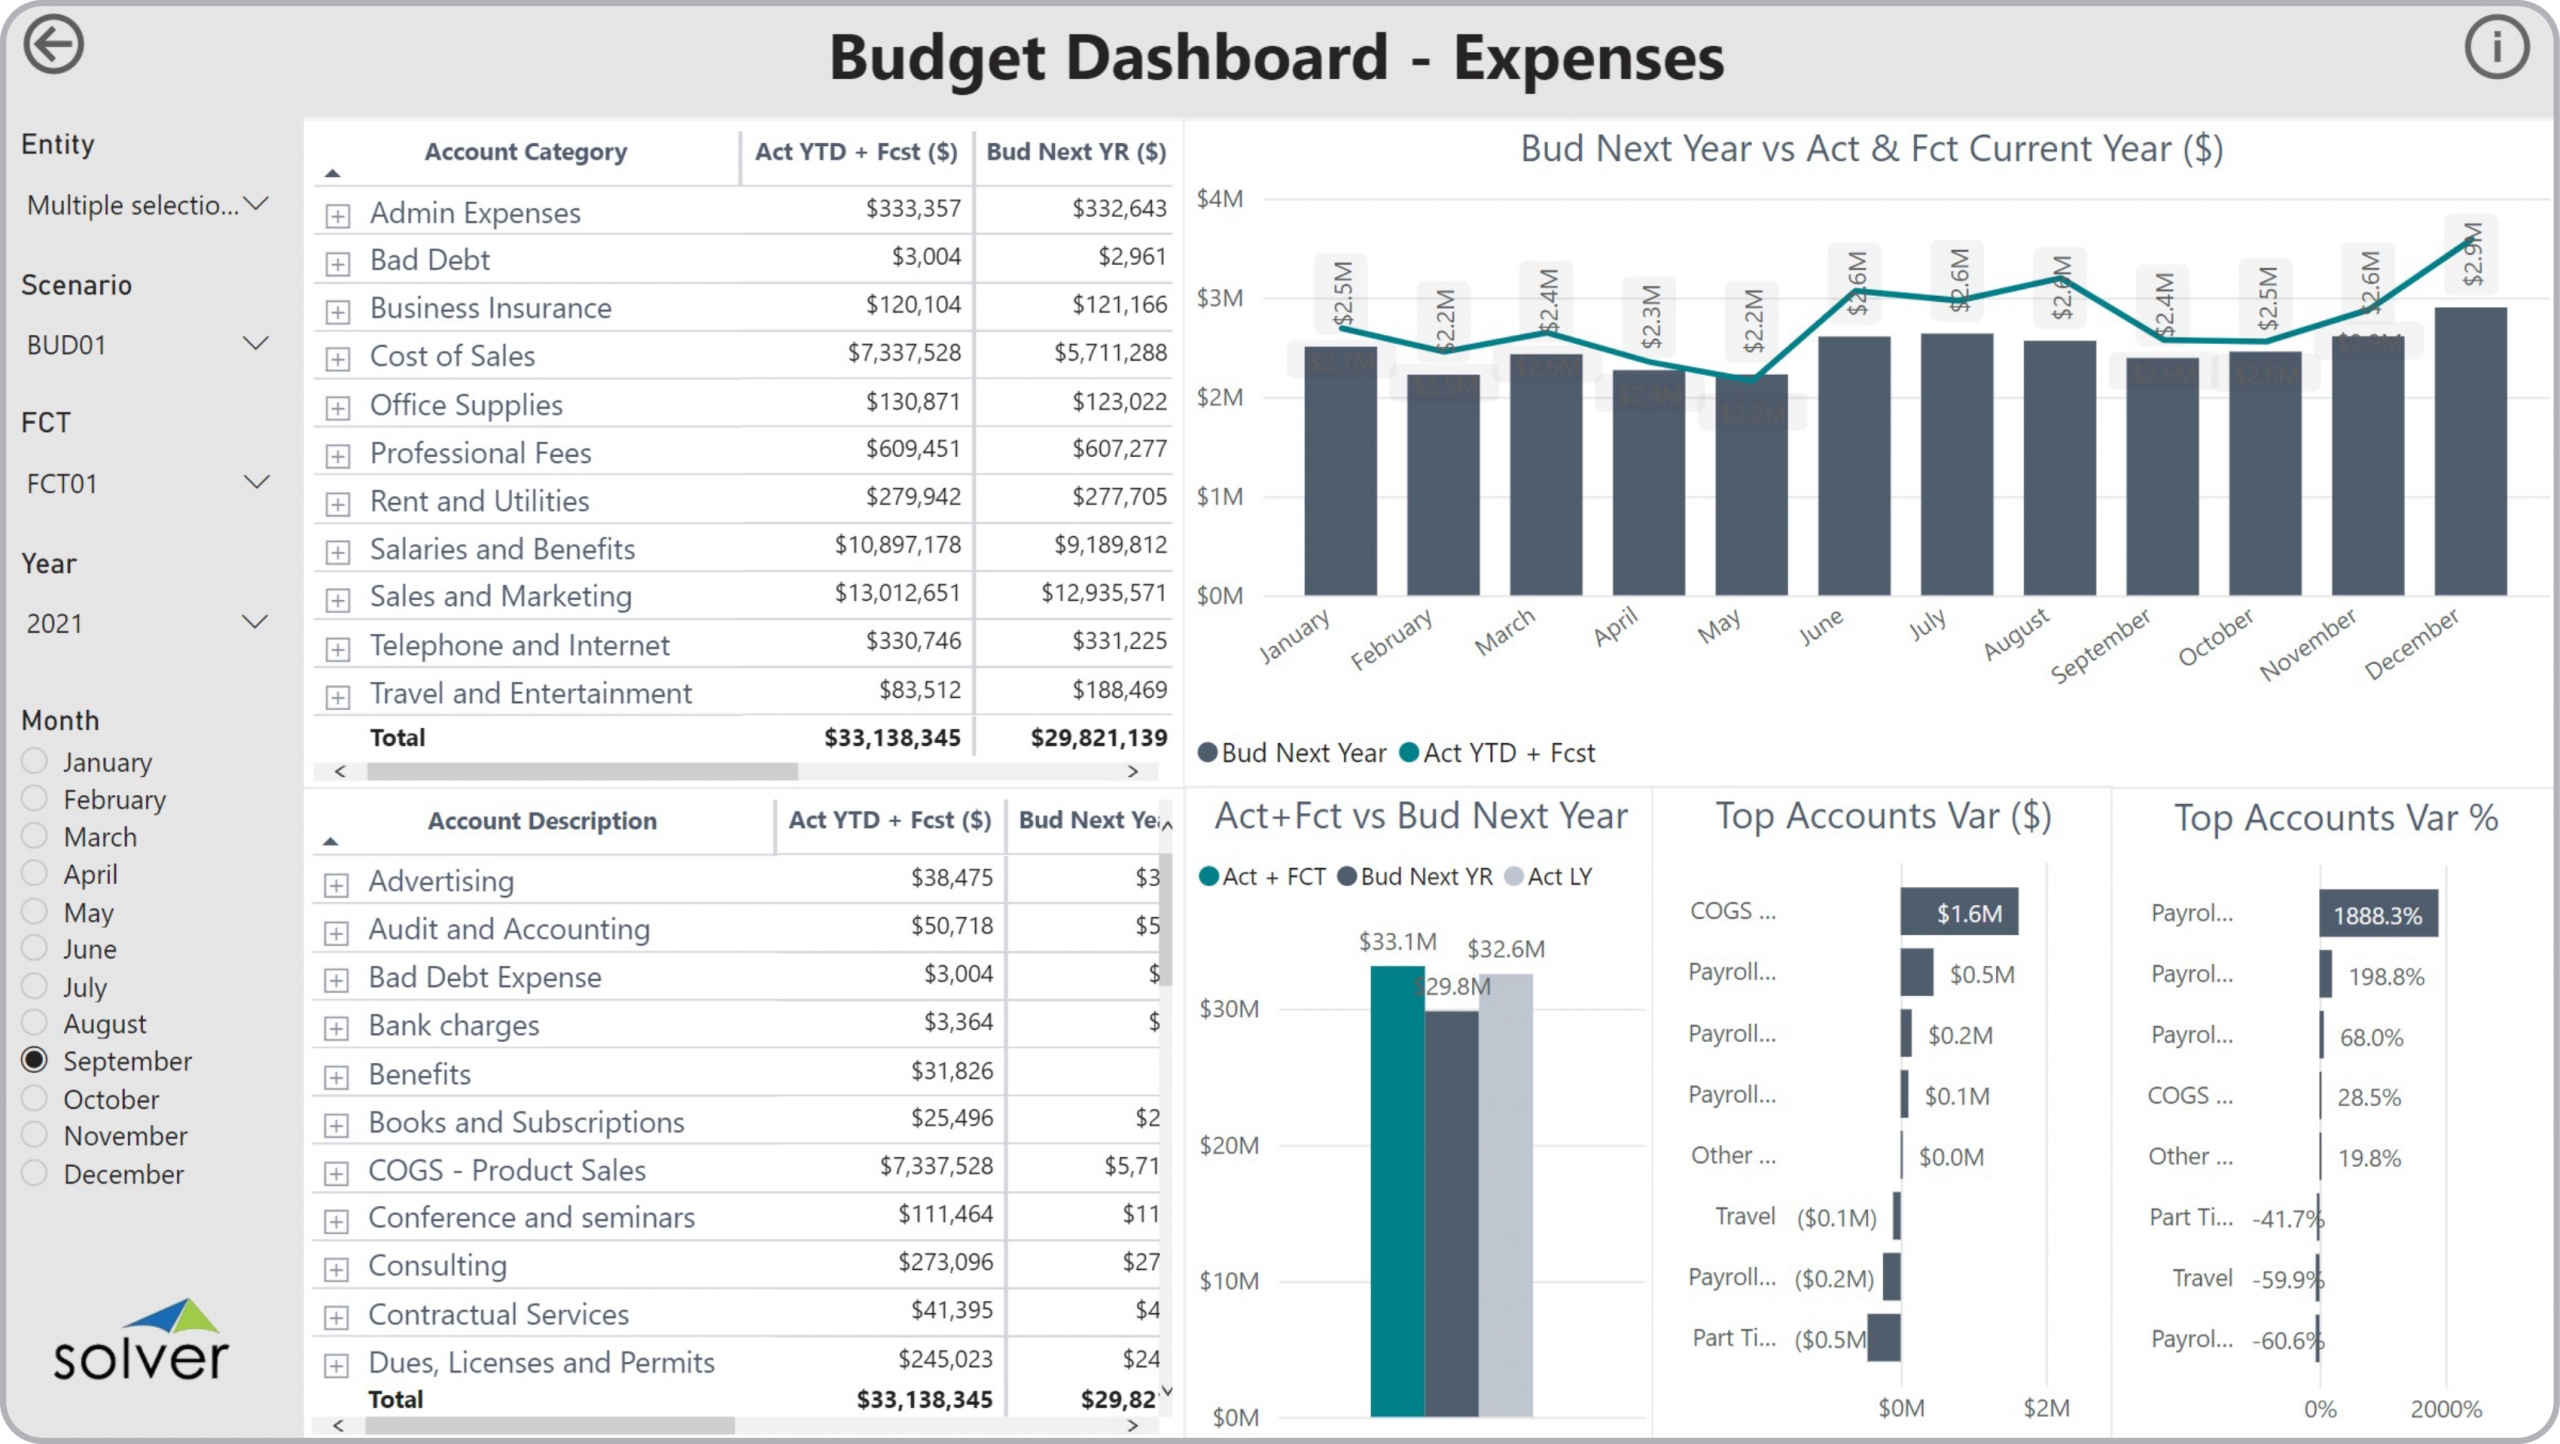 Example of an Expense Budget Dashboard to Streamline the Planning Process